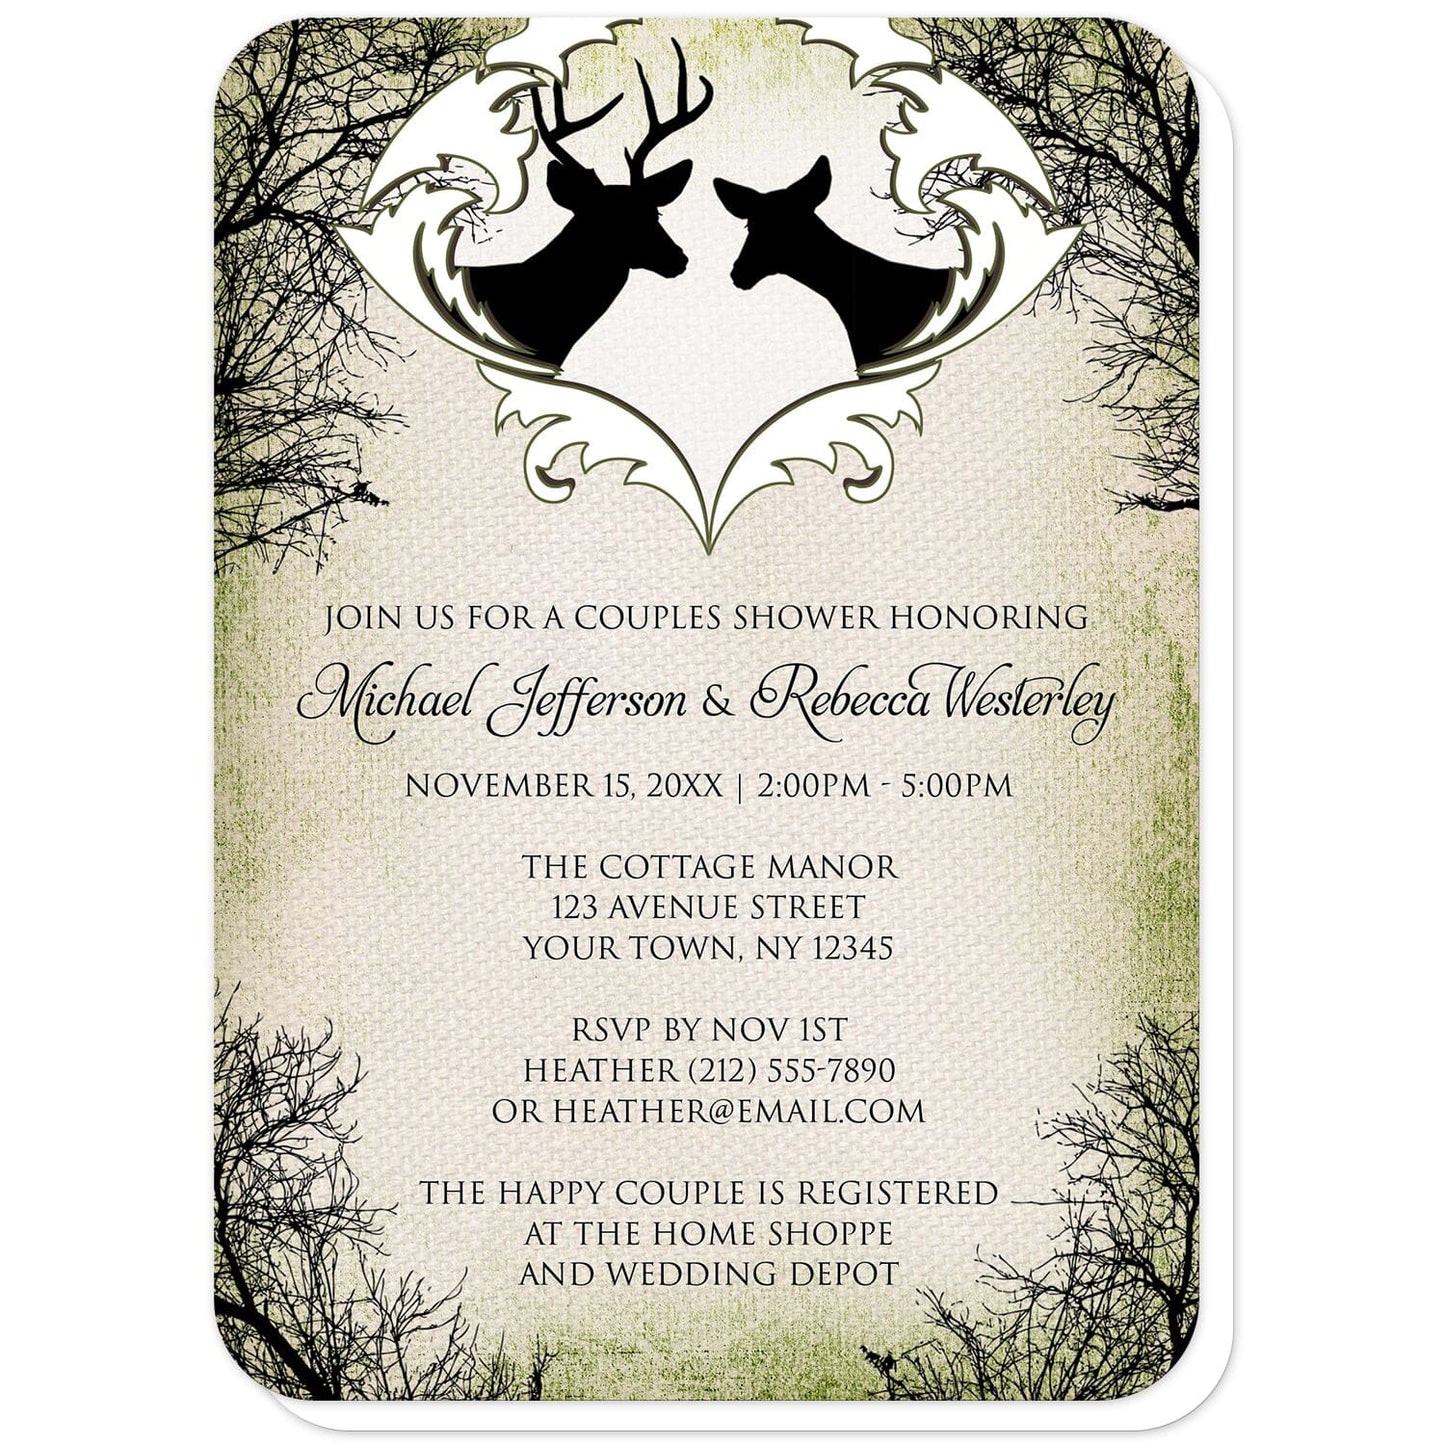 Rustic Deer Frame Canvas Couples Shower Invitations (with rounded corners) at Artistically Invited. Rustic deer frame canvas couples shower invitations designed with black silhouettes of a buck with antlers and a doe in a white frame design at the top, over a rustic brown and green canvas design bordered with winter tree silhouettes. Your personalized couple shower celebration details are custom printed in black below the deer over the canvas background design.